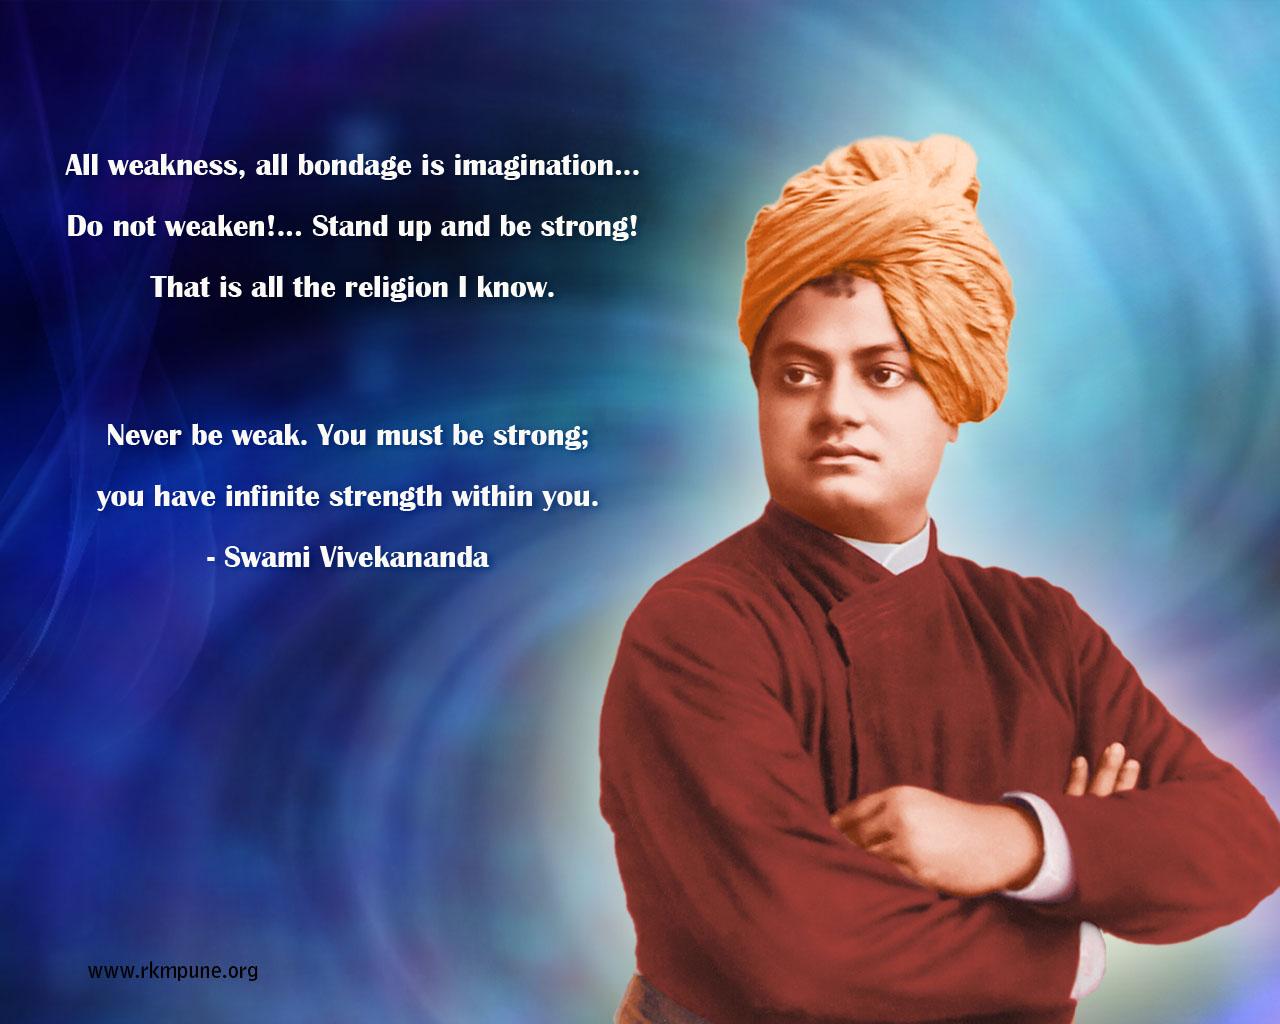 SWAMI VIVEKANANDA QUOTES WALLPAPER ON HI QUALITY LARGE PRINT 36X24 INCHES  Photographic Paper - Art & Paintings posters in India - Buy art, film,  design, movie, music, nature and educational paintings/wallpapers at  Flipkart.com